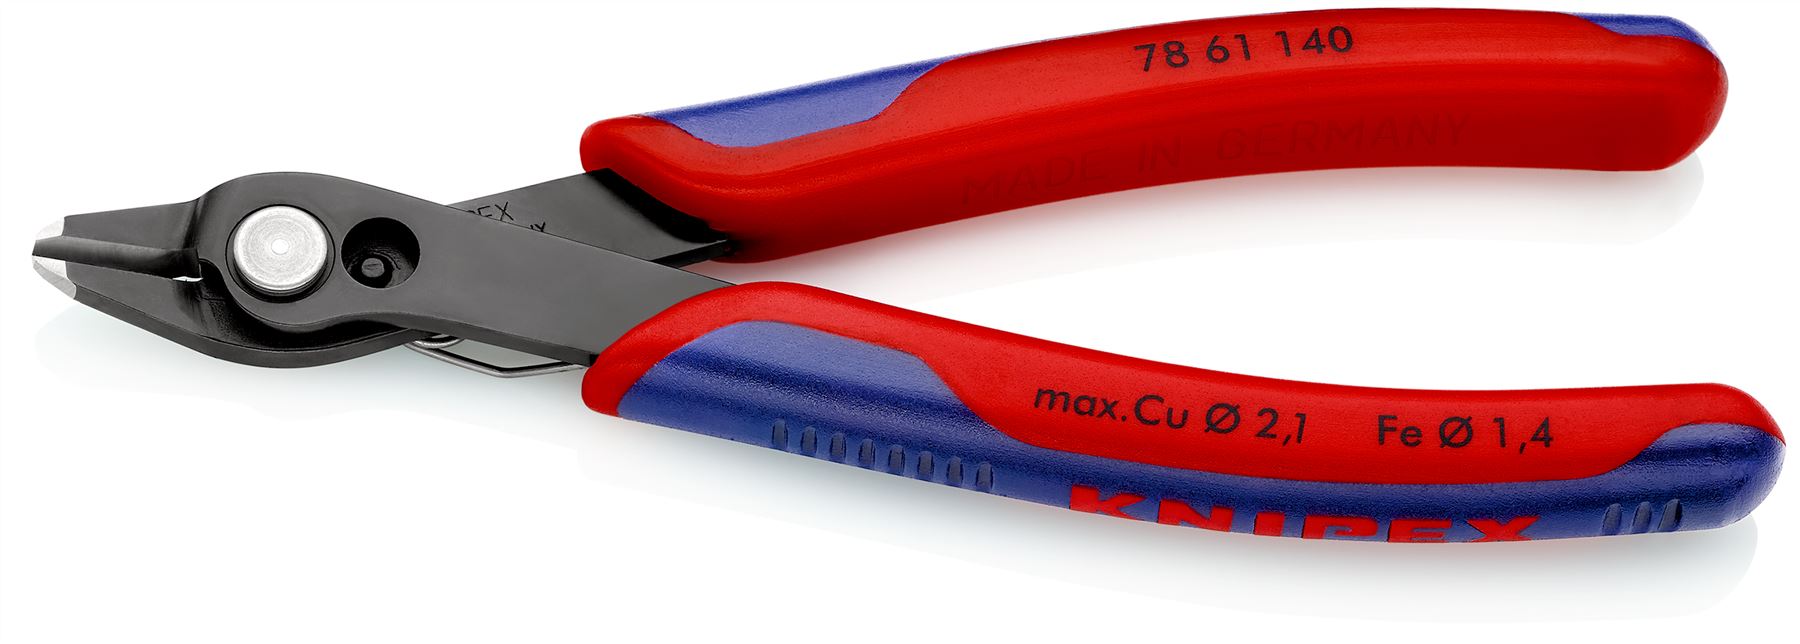 Knipex Electronic Super Knips® XL 140mm Fine Wire Cutting Pliers 78 61 140